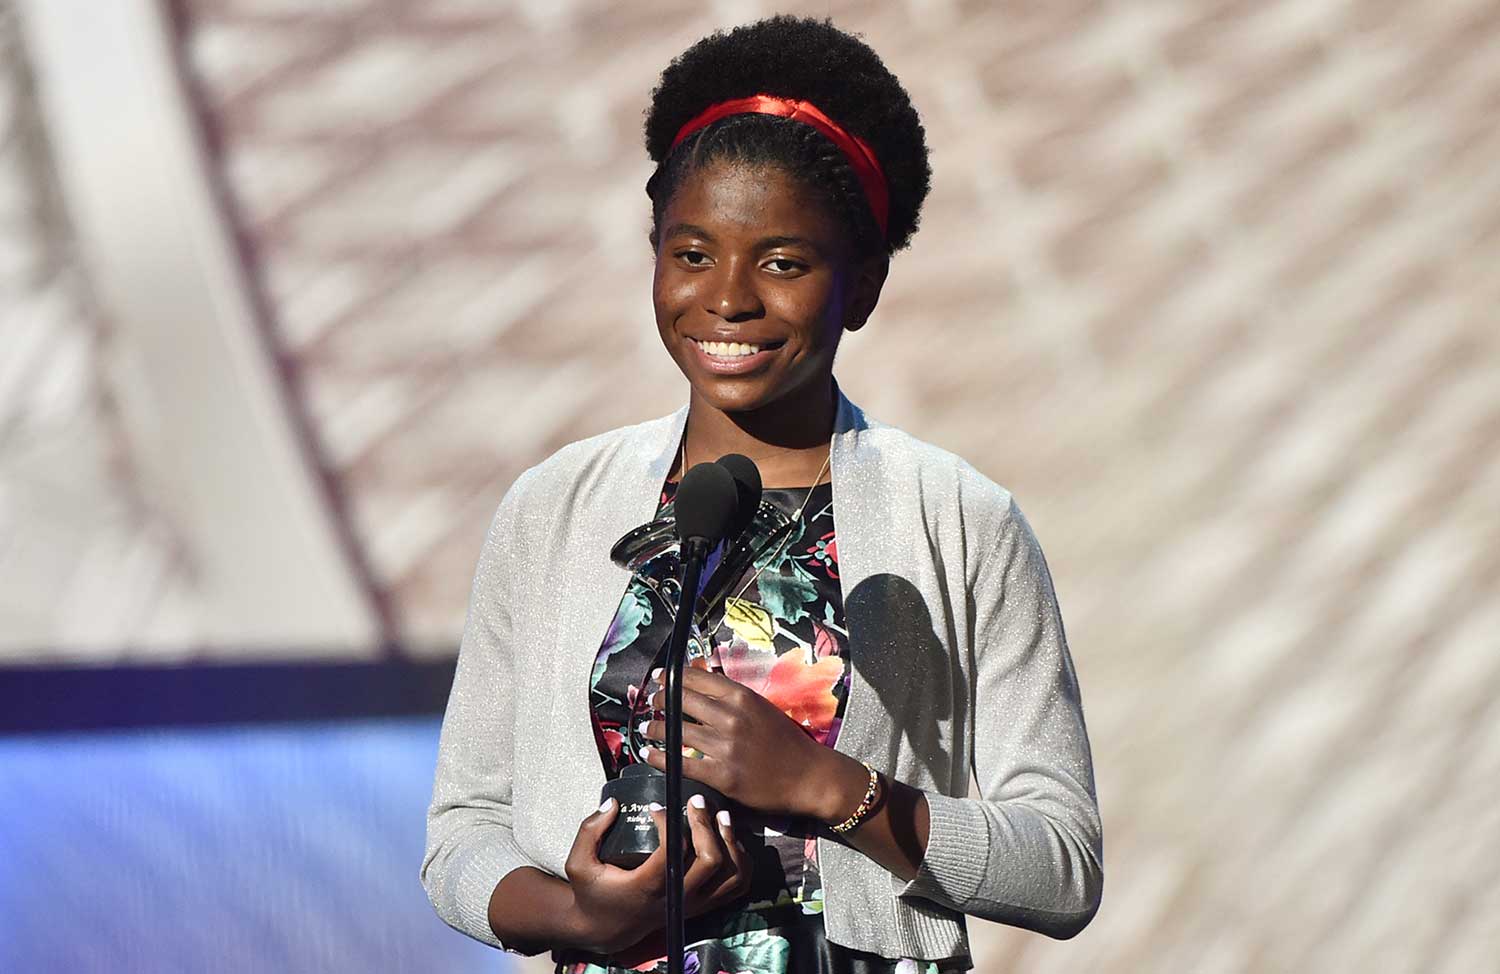 Zaila Avant-garde smiles and holds a trophy at a microphone.